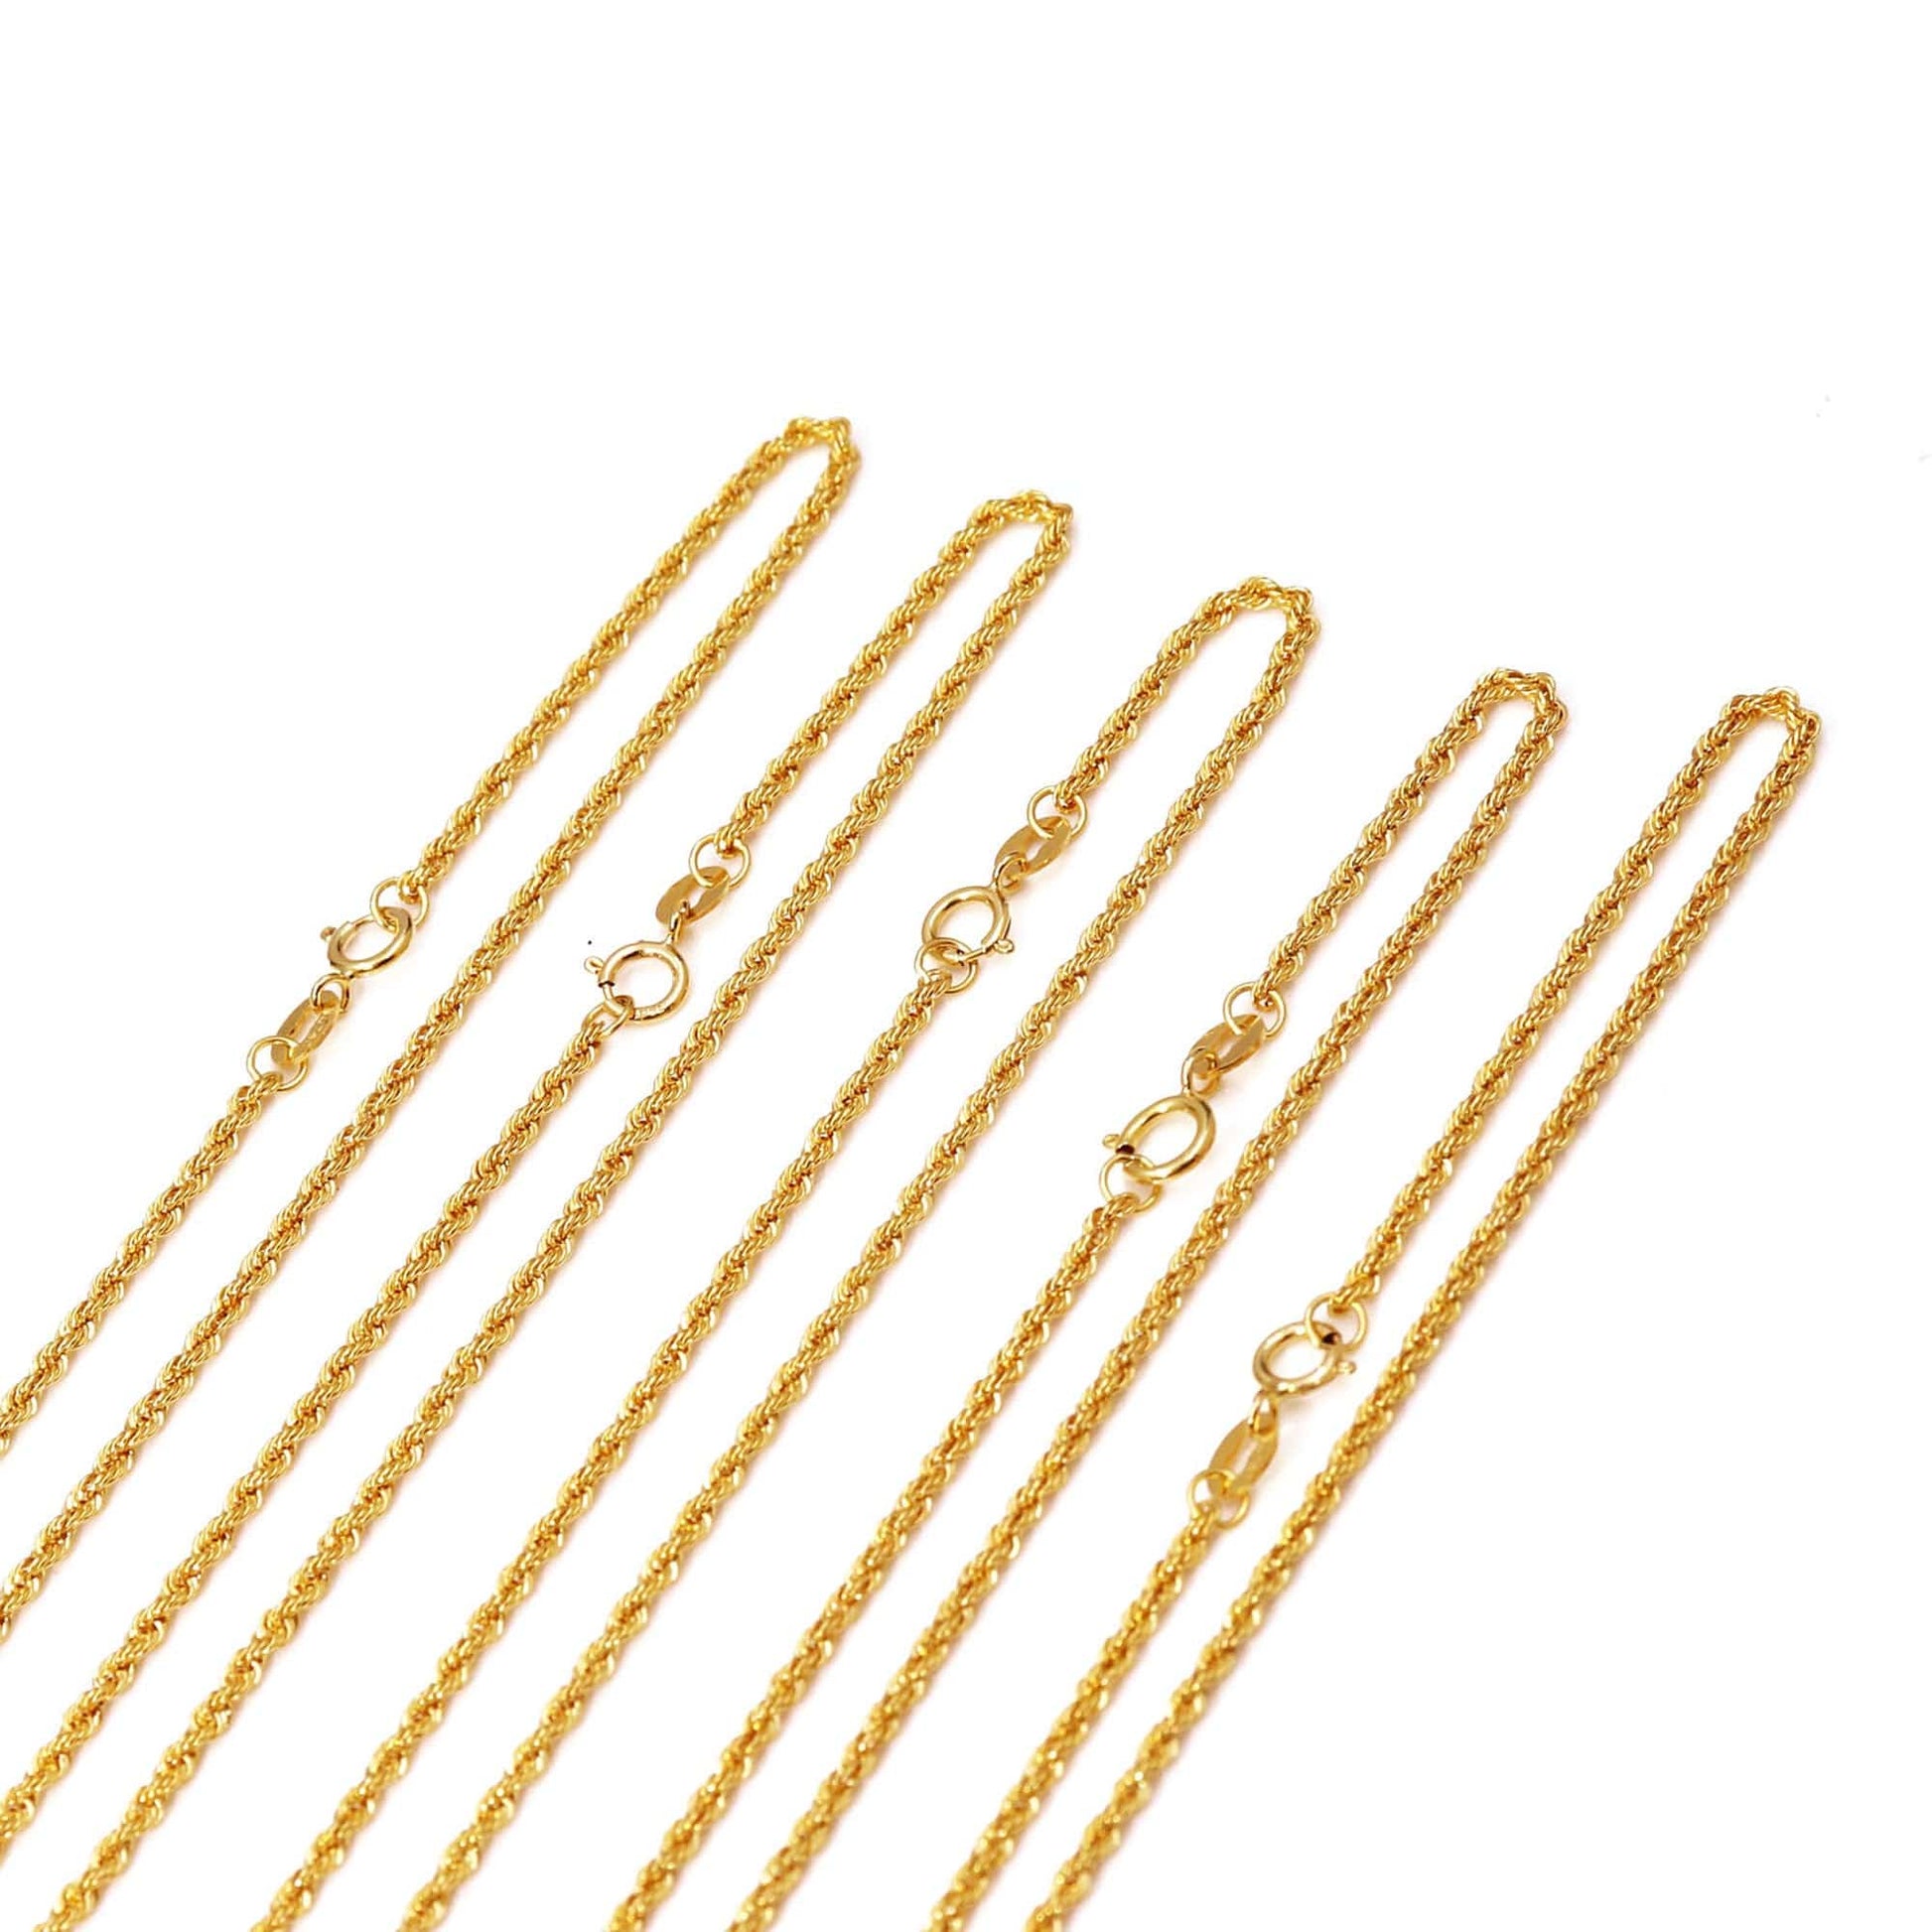 VVS Jewelry hip hop jewelry 18k Yellow Gold / 16inches(1.45g) 18K Solid Gold 1.7mm Rope Chain